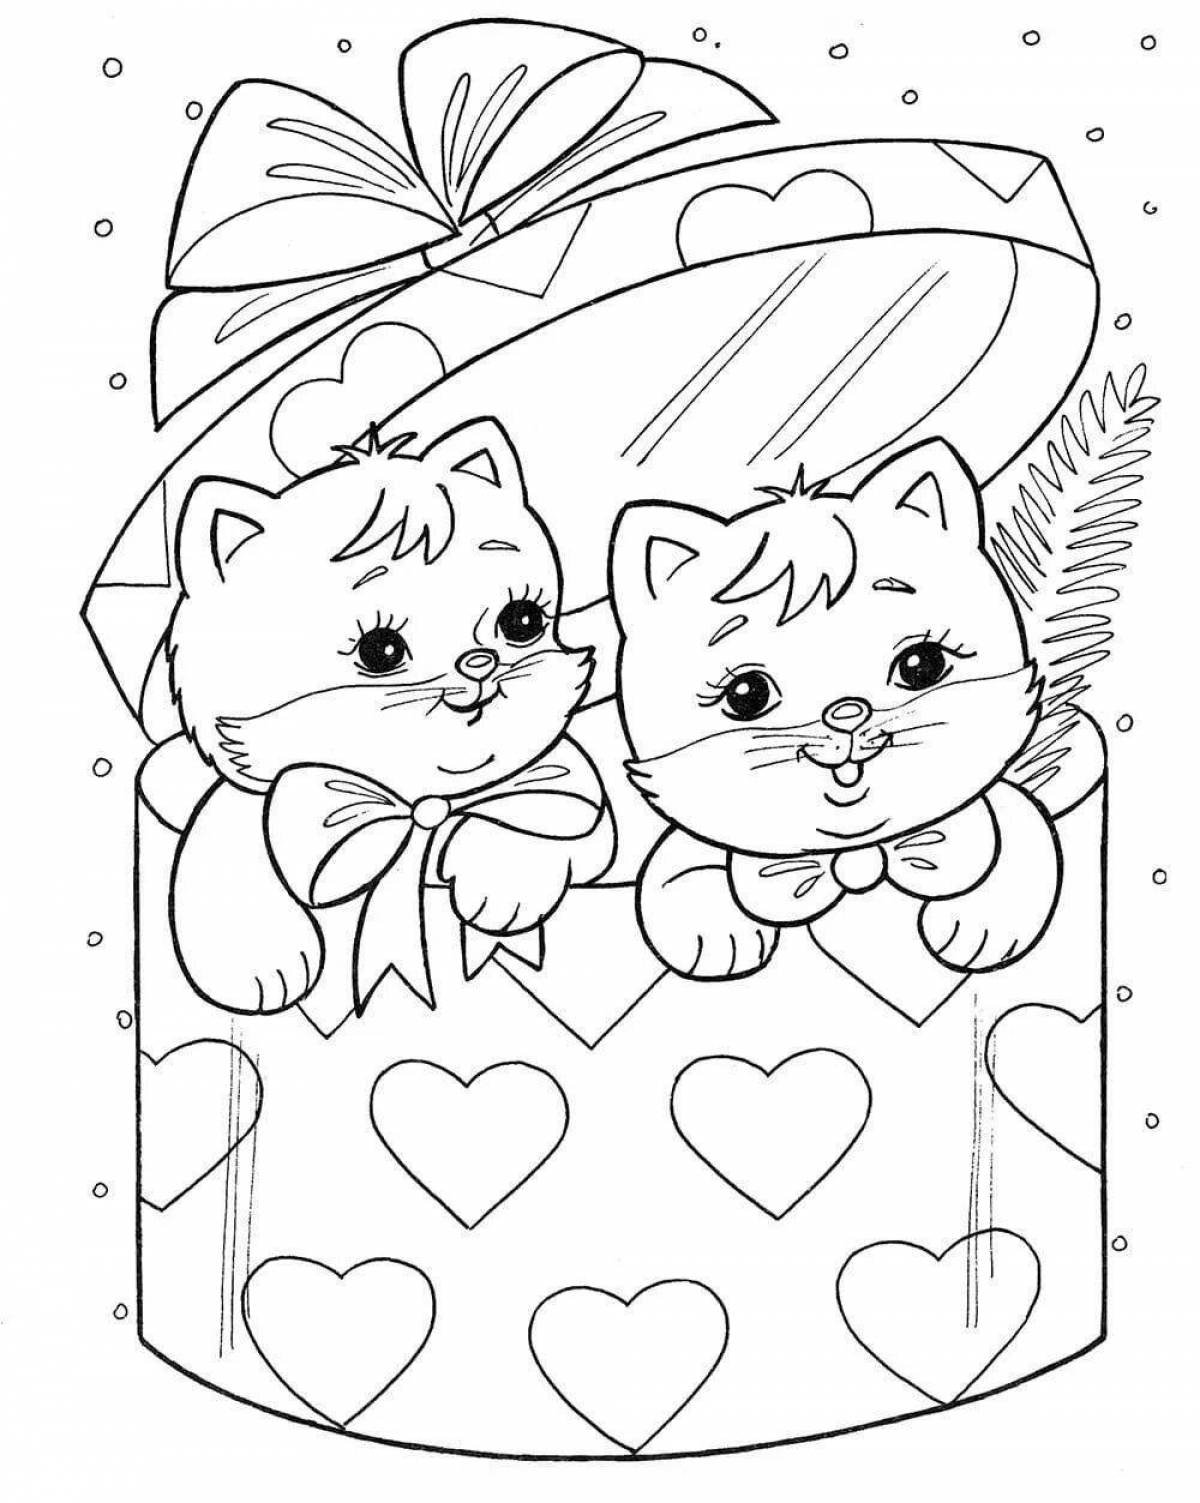 Tiny kittens coloring book